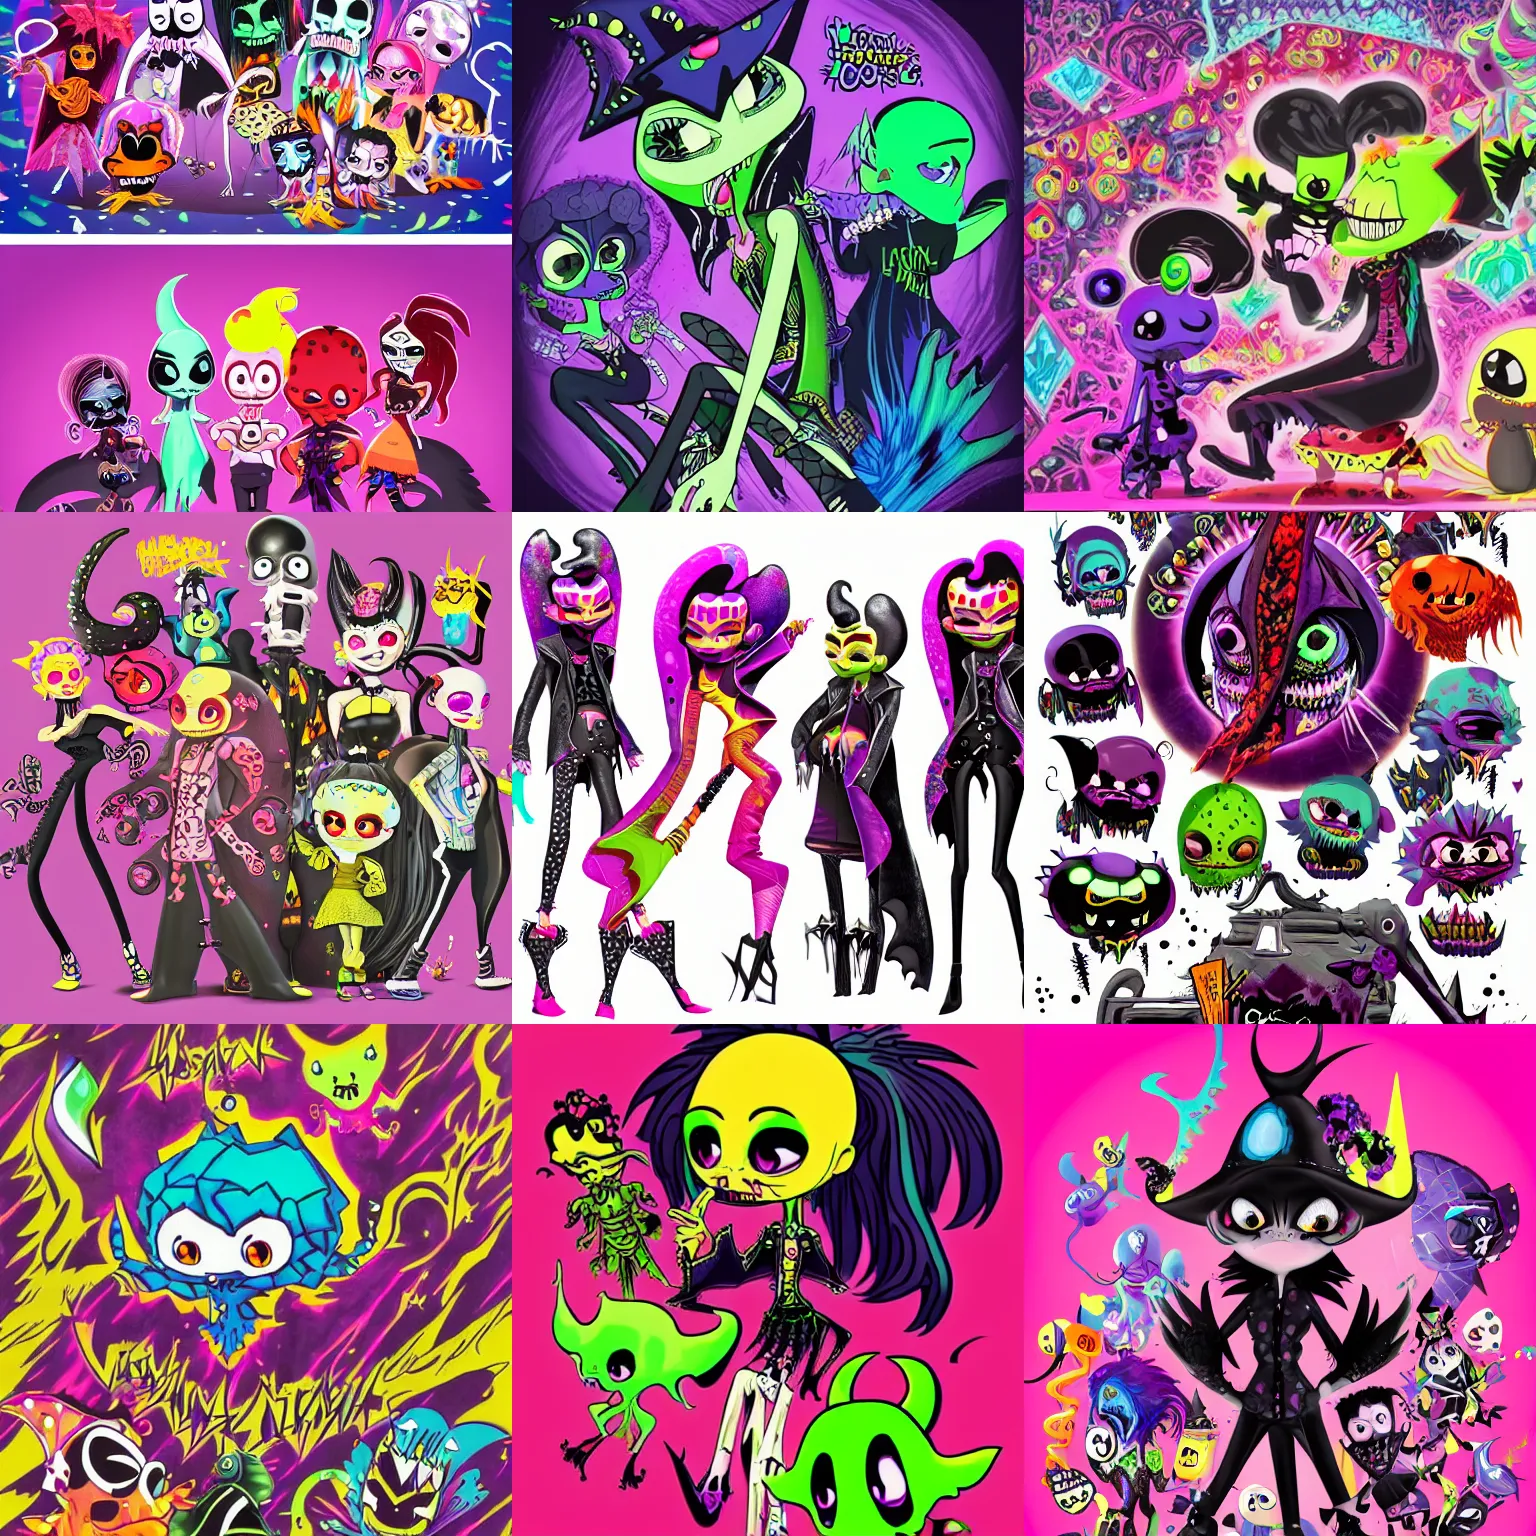 Prompt: lisa frank gothic vampiric punk vampiric rockstar vampire squid concept character designs of various shapes and sizes by genndy tartakovsky and splatoon by nintendo and the psychonauts by doublefine team of artists for the new hotel transylvania film